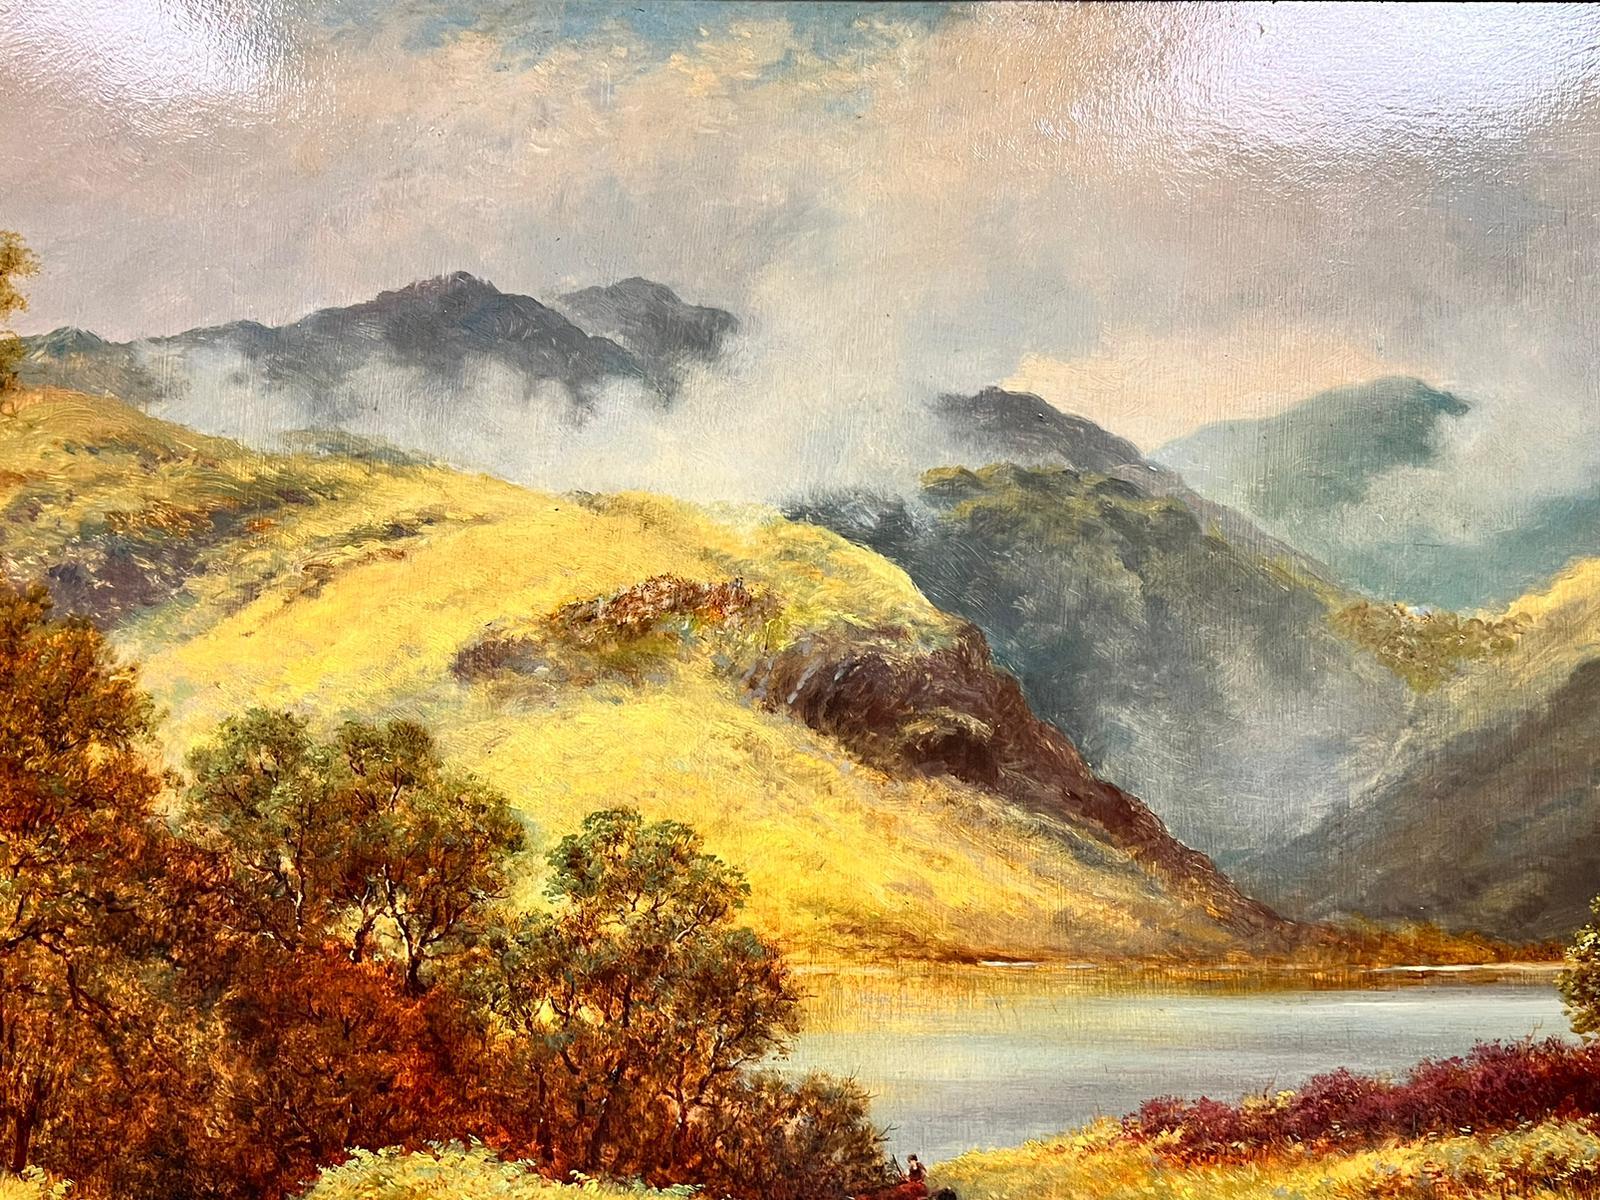 Scottish Highlands Landscape, circa 1930's
Sidney P. Winder, British 1884-1964
signed oil on board, framed 
framed: 29.5 x 39 inches
board: 25 x 35 inches
provenance: private collection. UK
The painting is in very good and presentable condition.

   